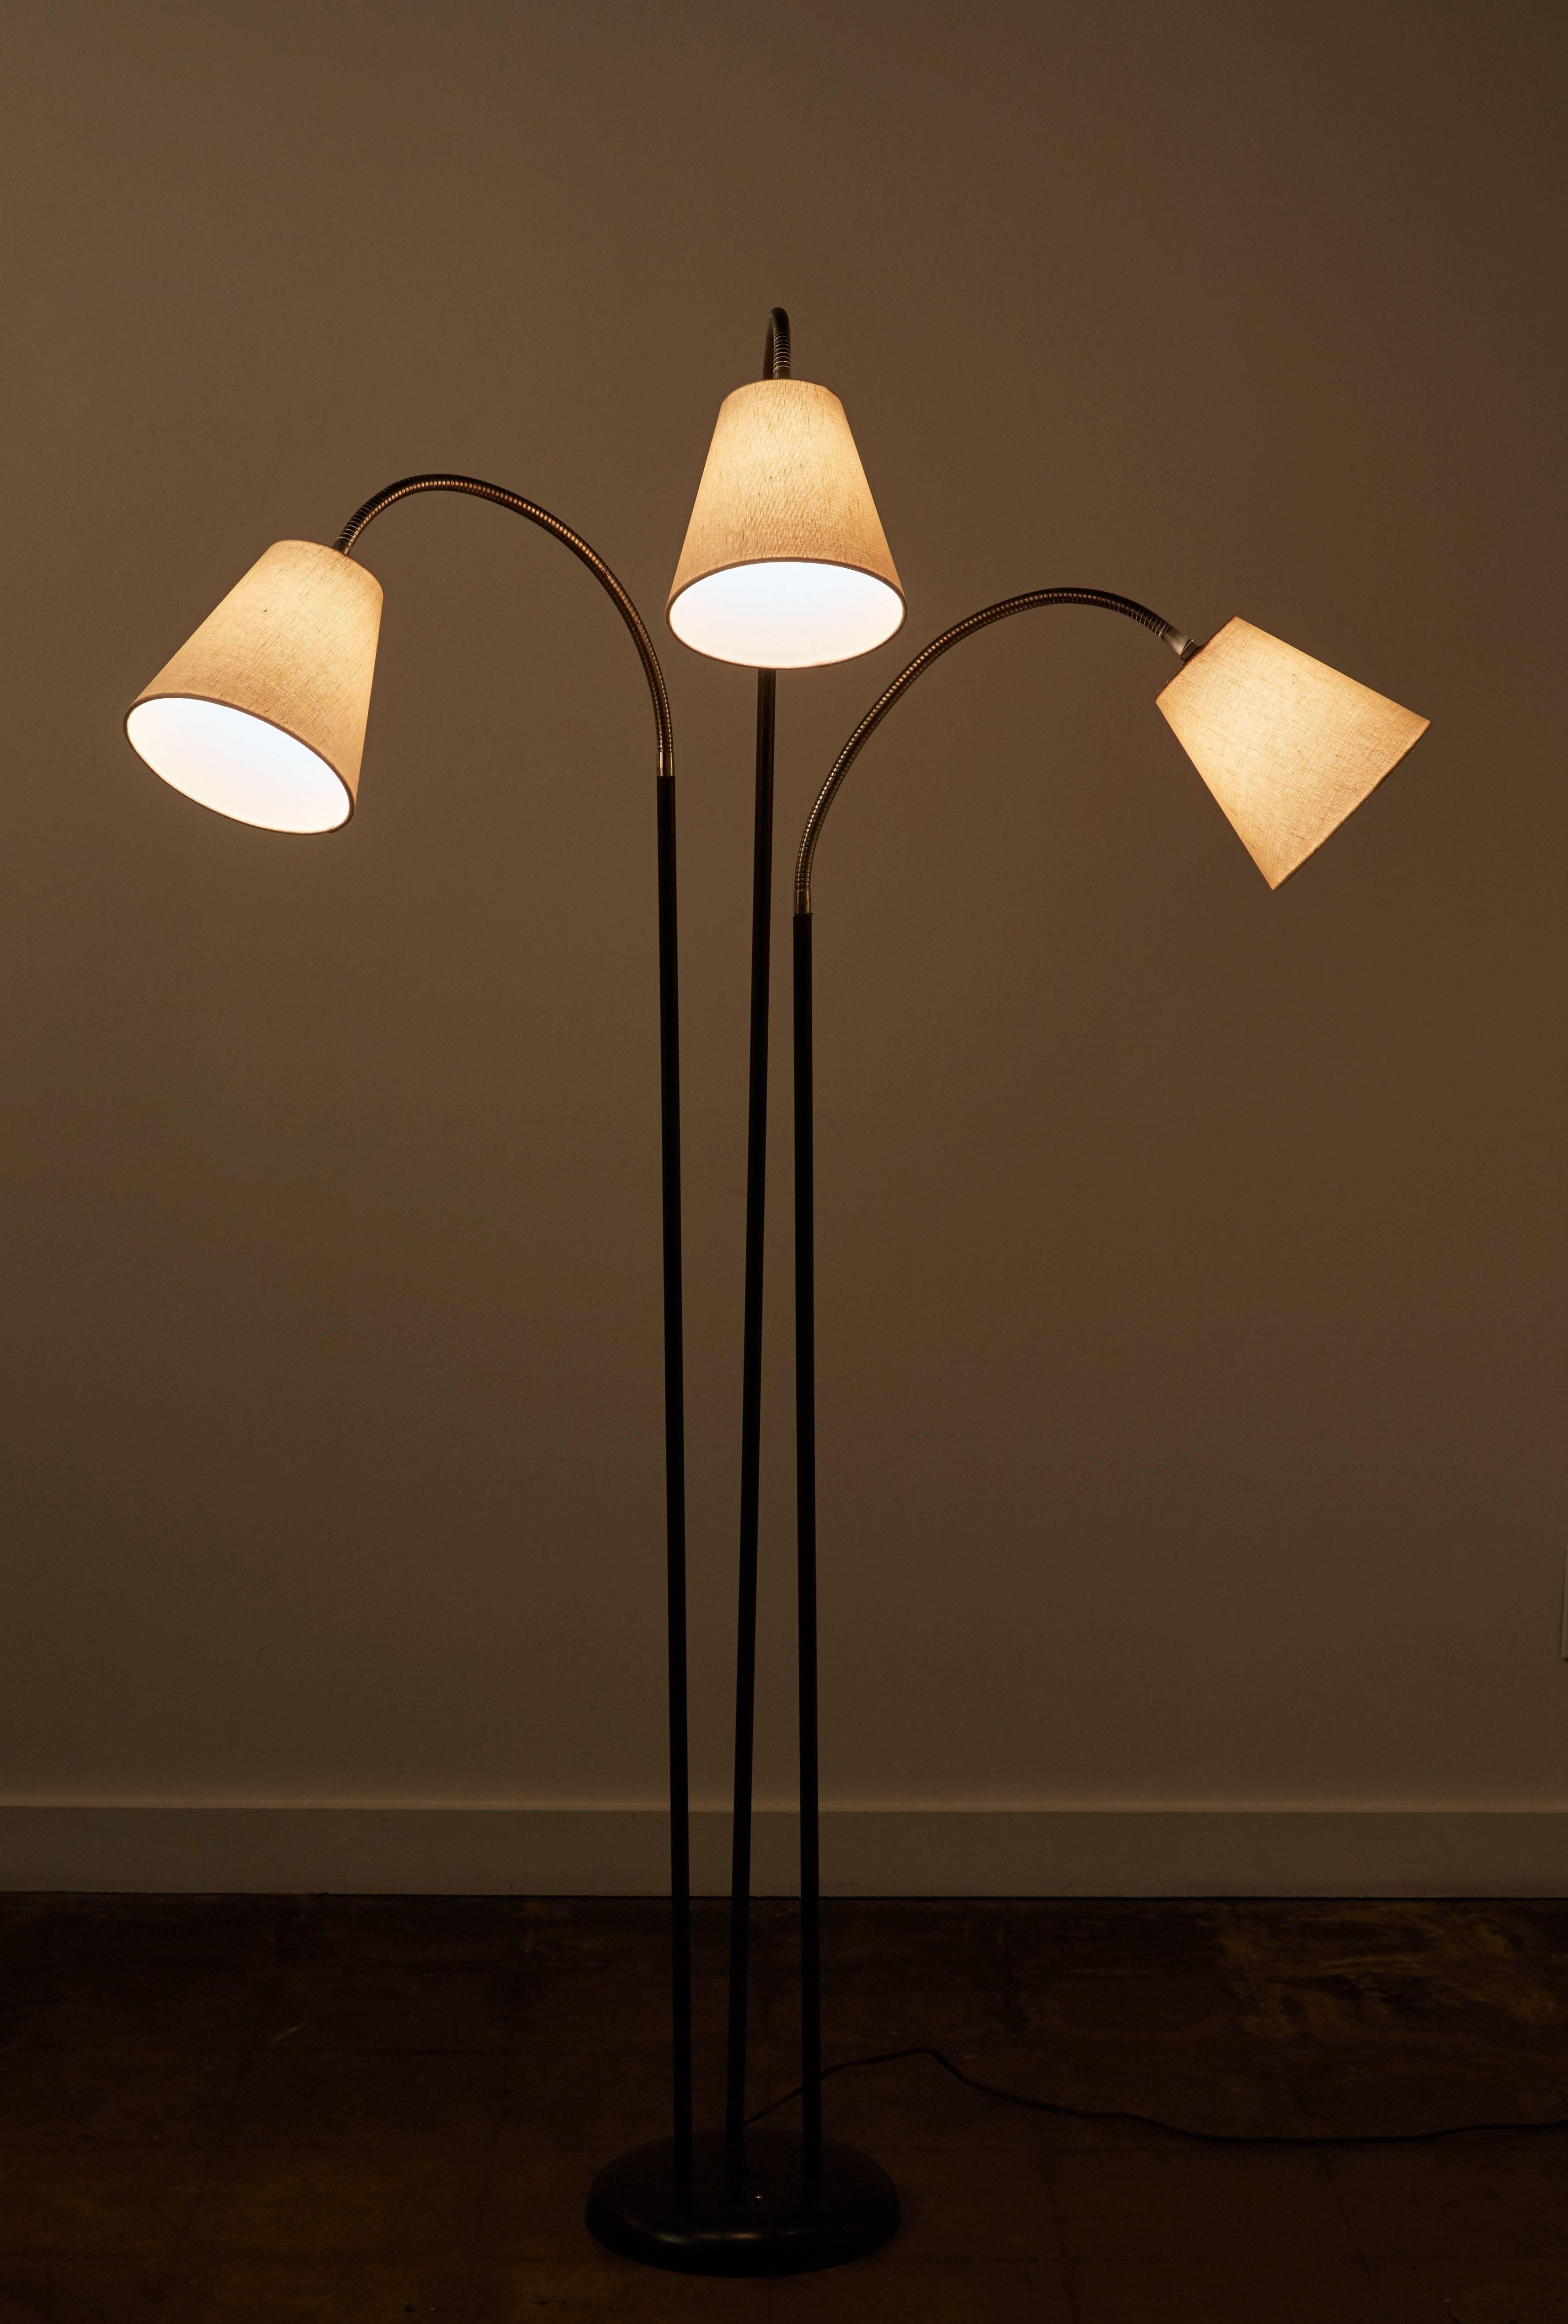 Floor lamp with three articulating arms by David Wurster designed in the US, circa 1950s. New custom fabricated linen shades. Each shade articulates in various positions by nickel plated brass gooseneck stems. Rewired. Takes three E26 75w maximum